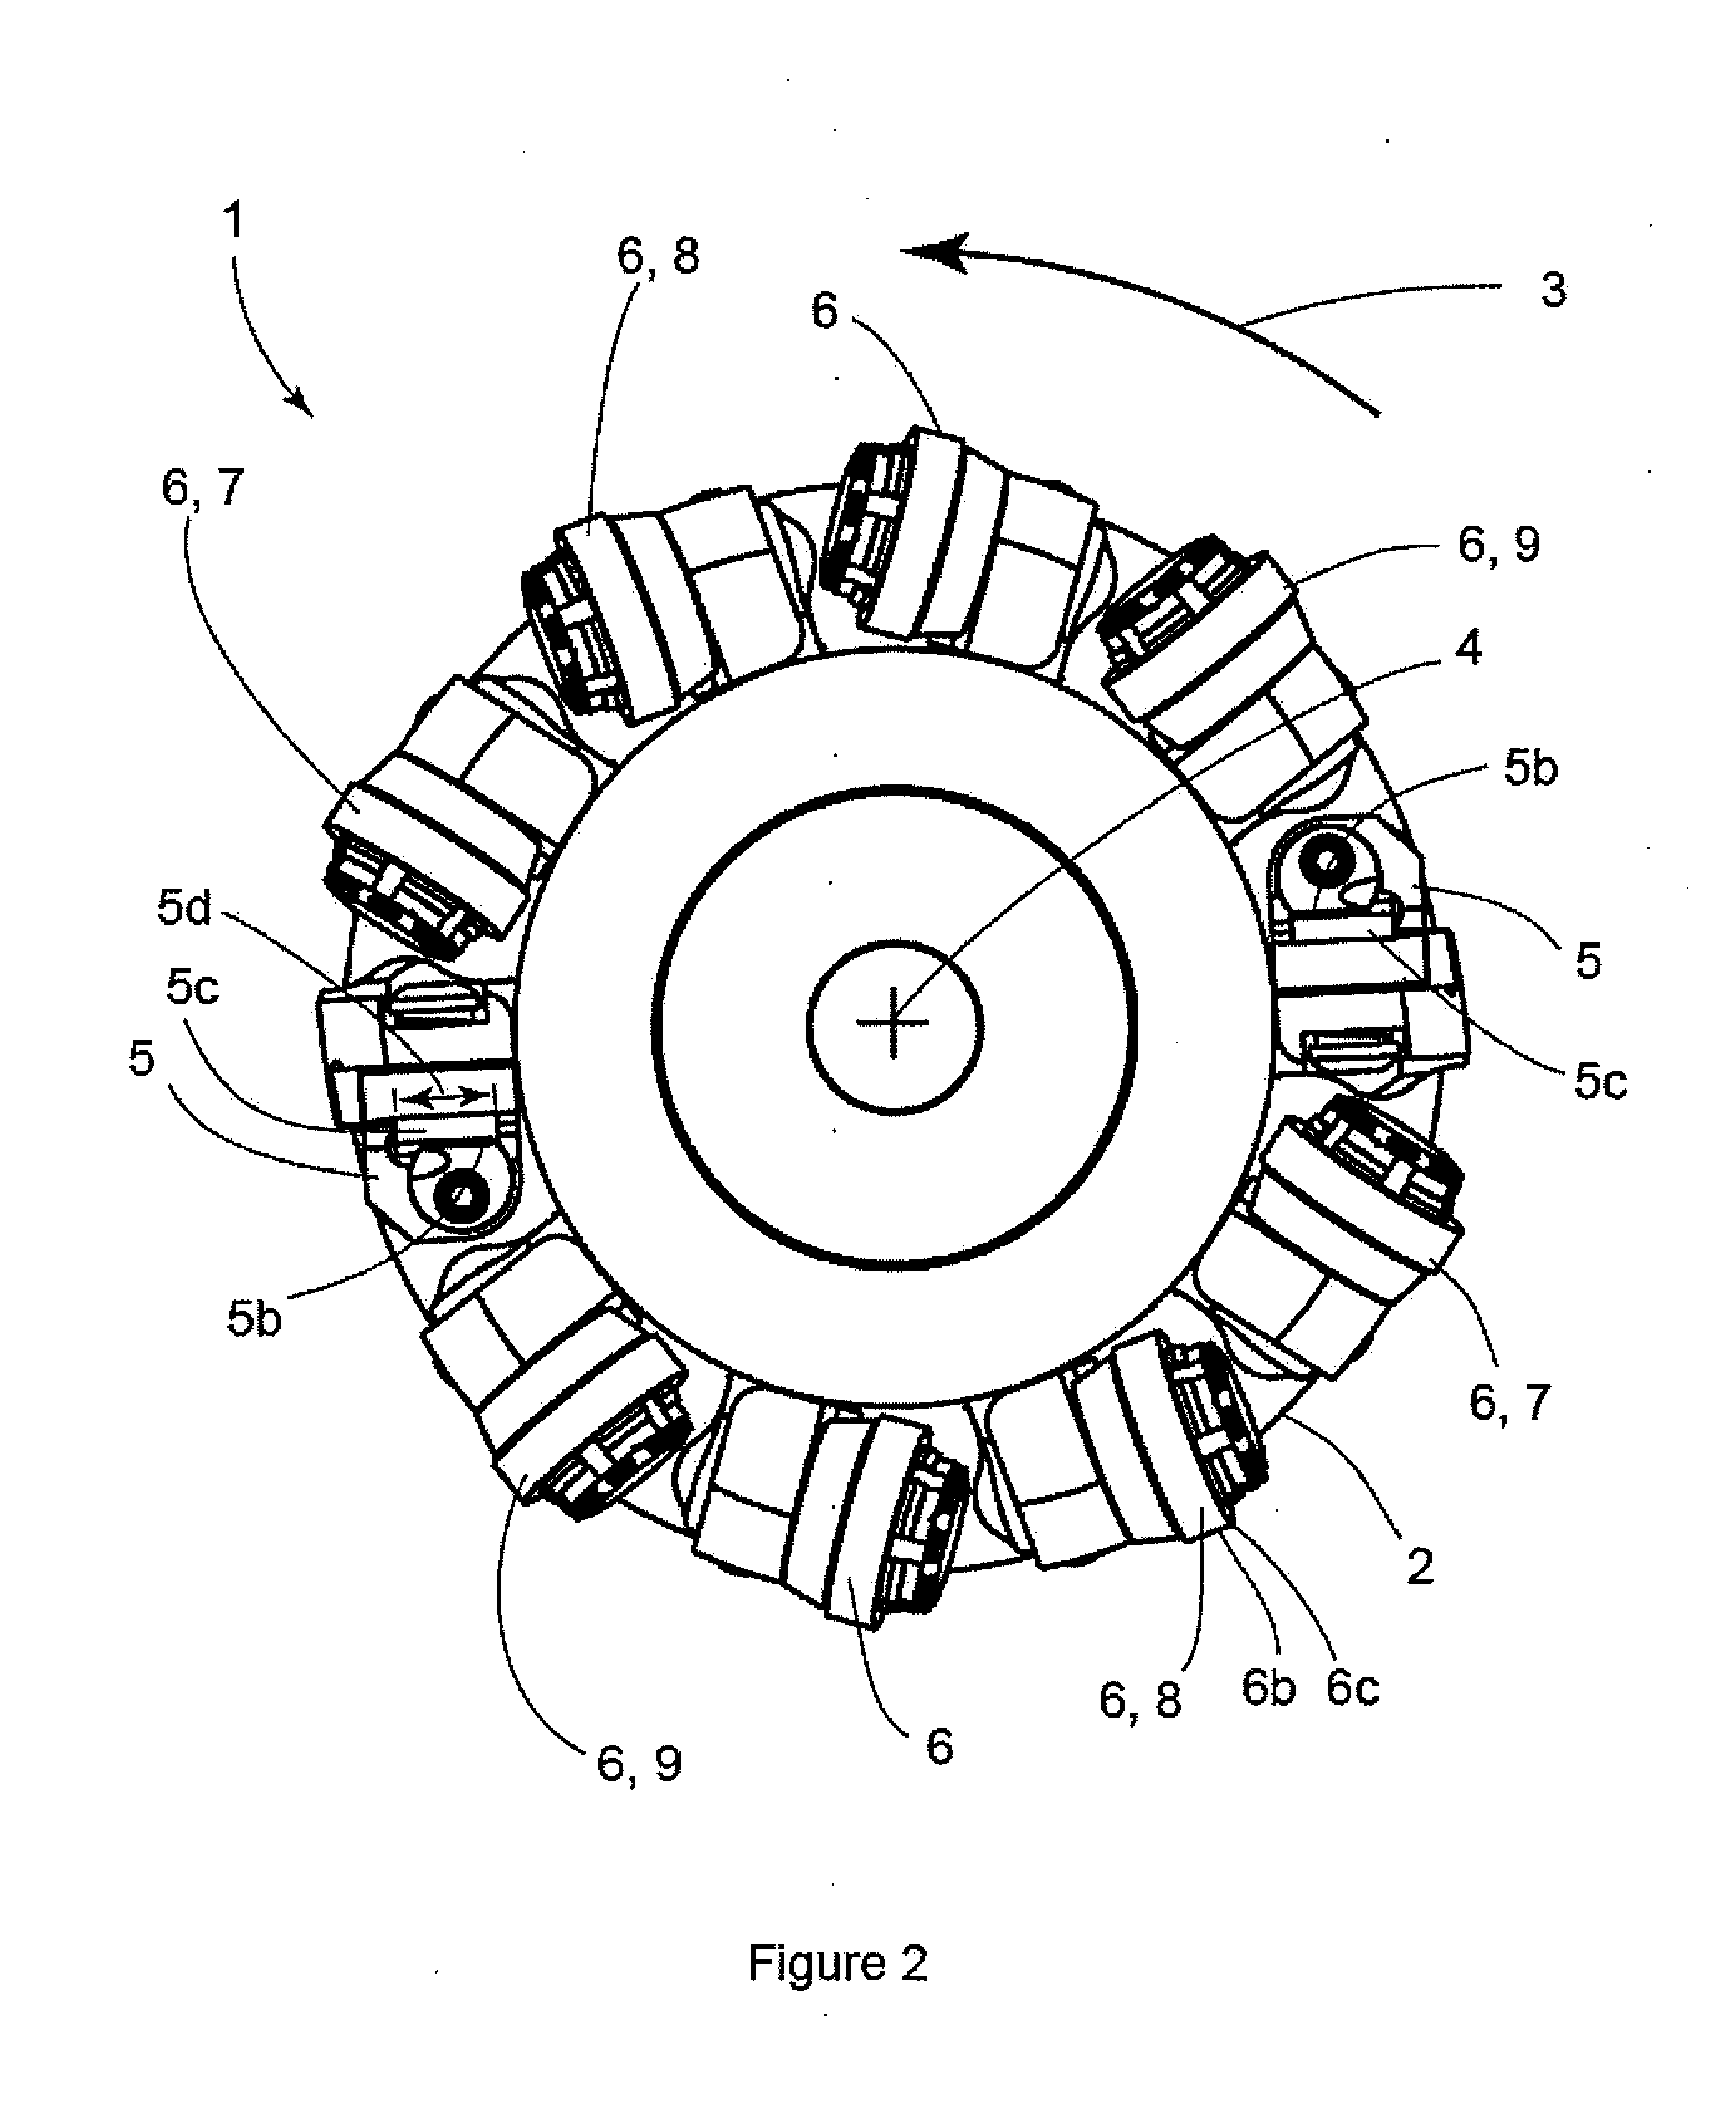 Finishing face mill with reduced chip load variation and method of obtaining the same